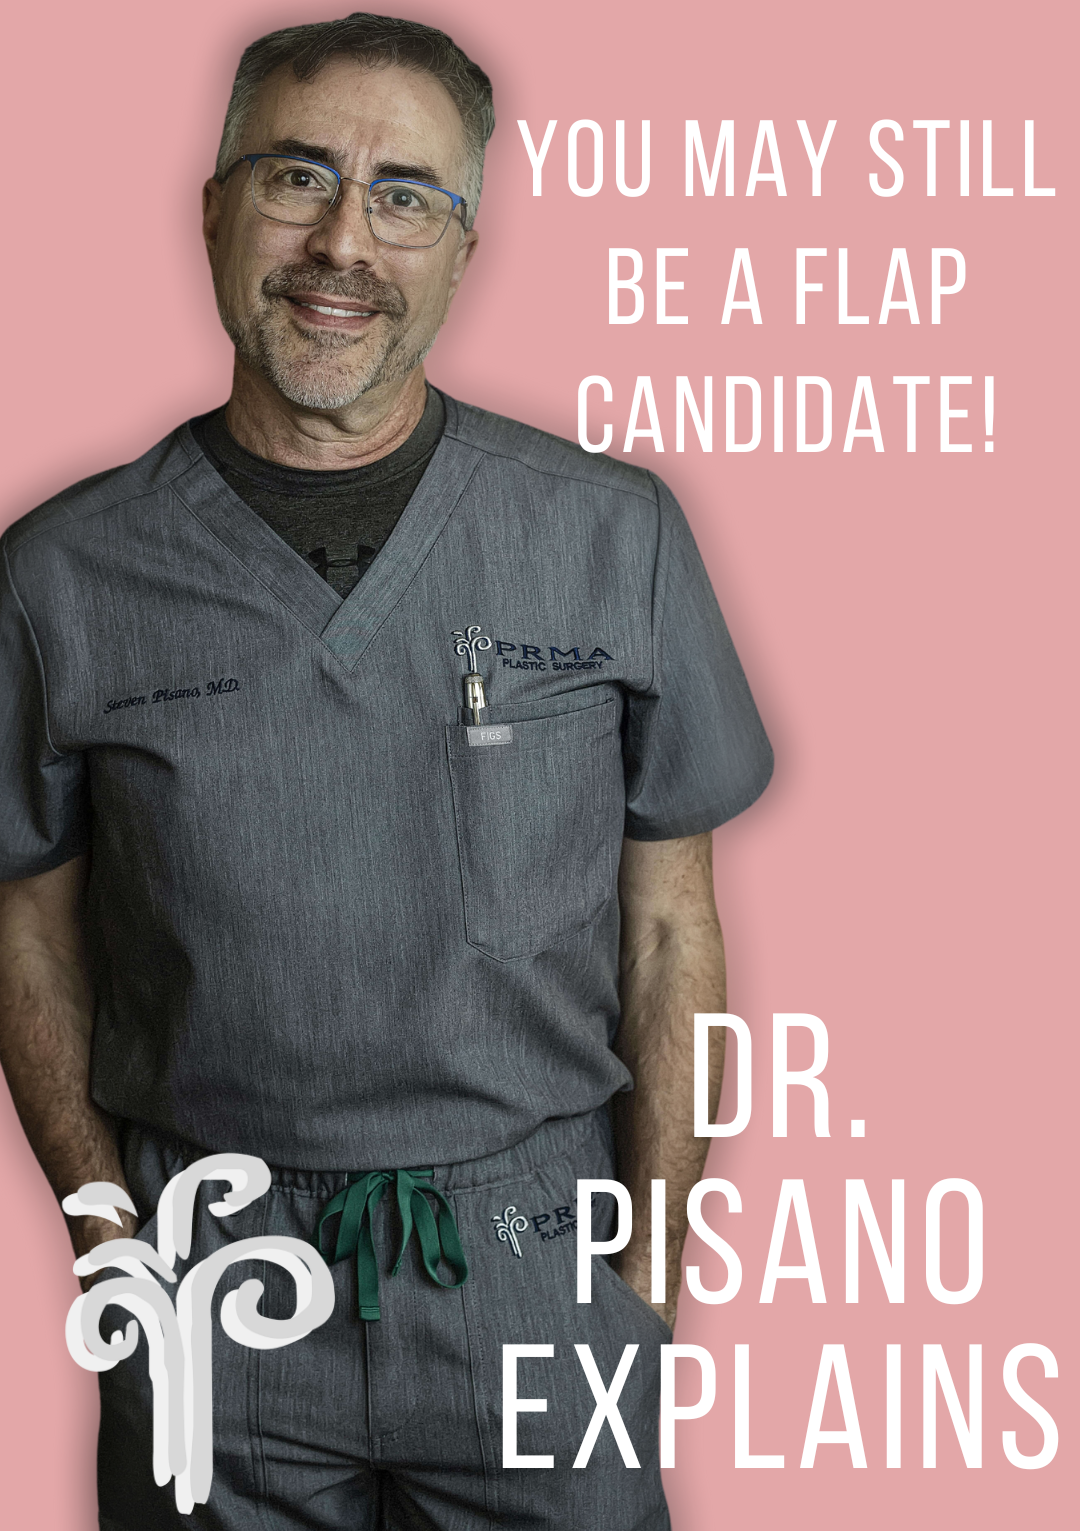 Dr Steven Pisano, San Antonio, Texas, Stone Oak | Specialist in breast reconstruction, microsurgery, restoring feeing after mastectomy, aesthetic plastic surgery, TruSense®, High Definition DIEP